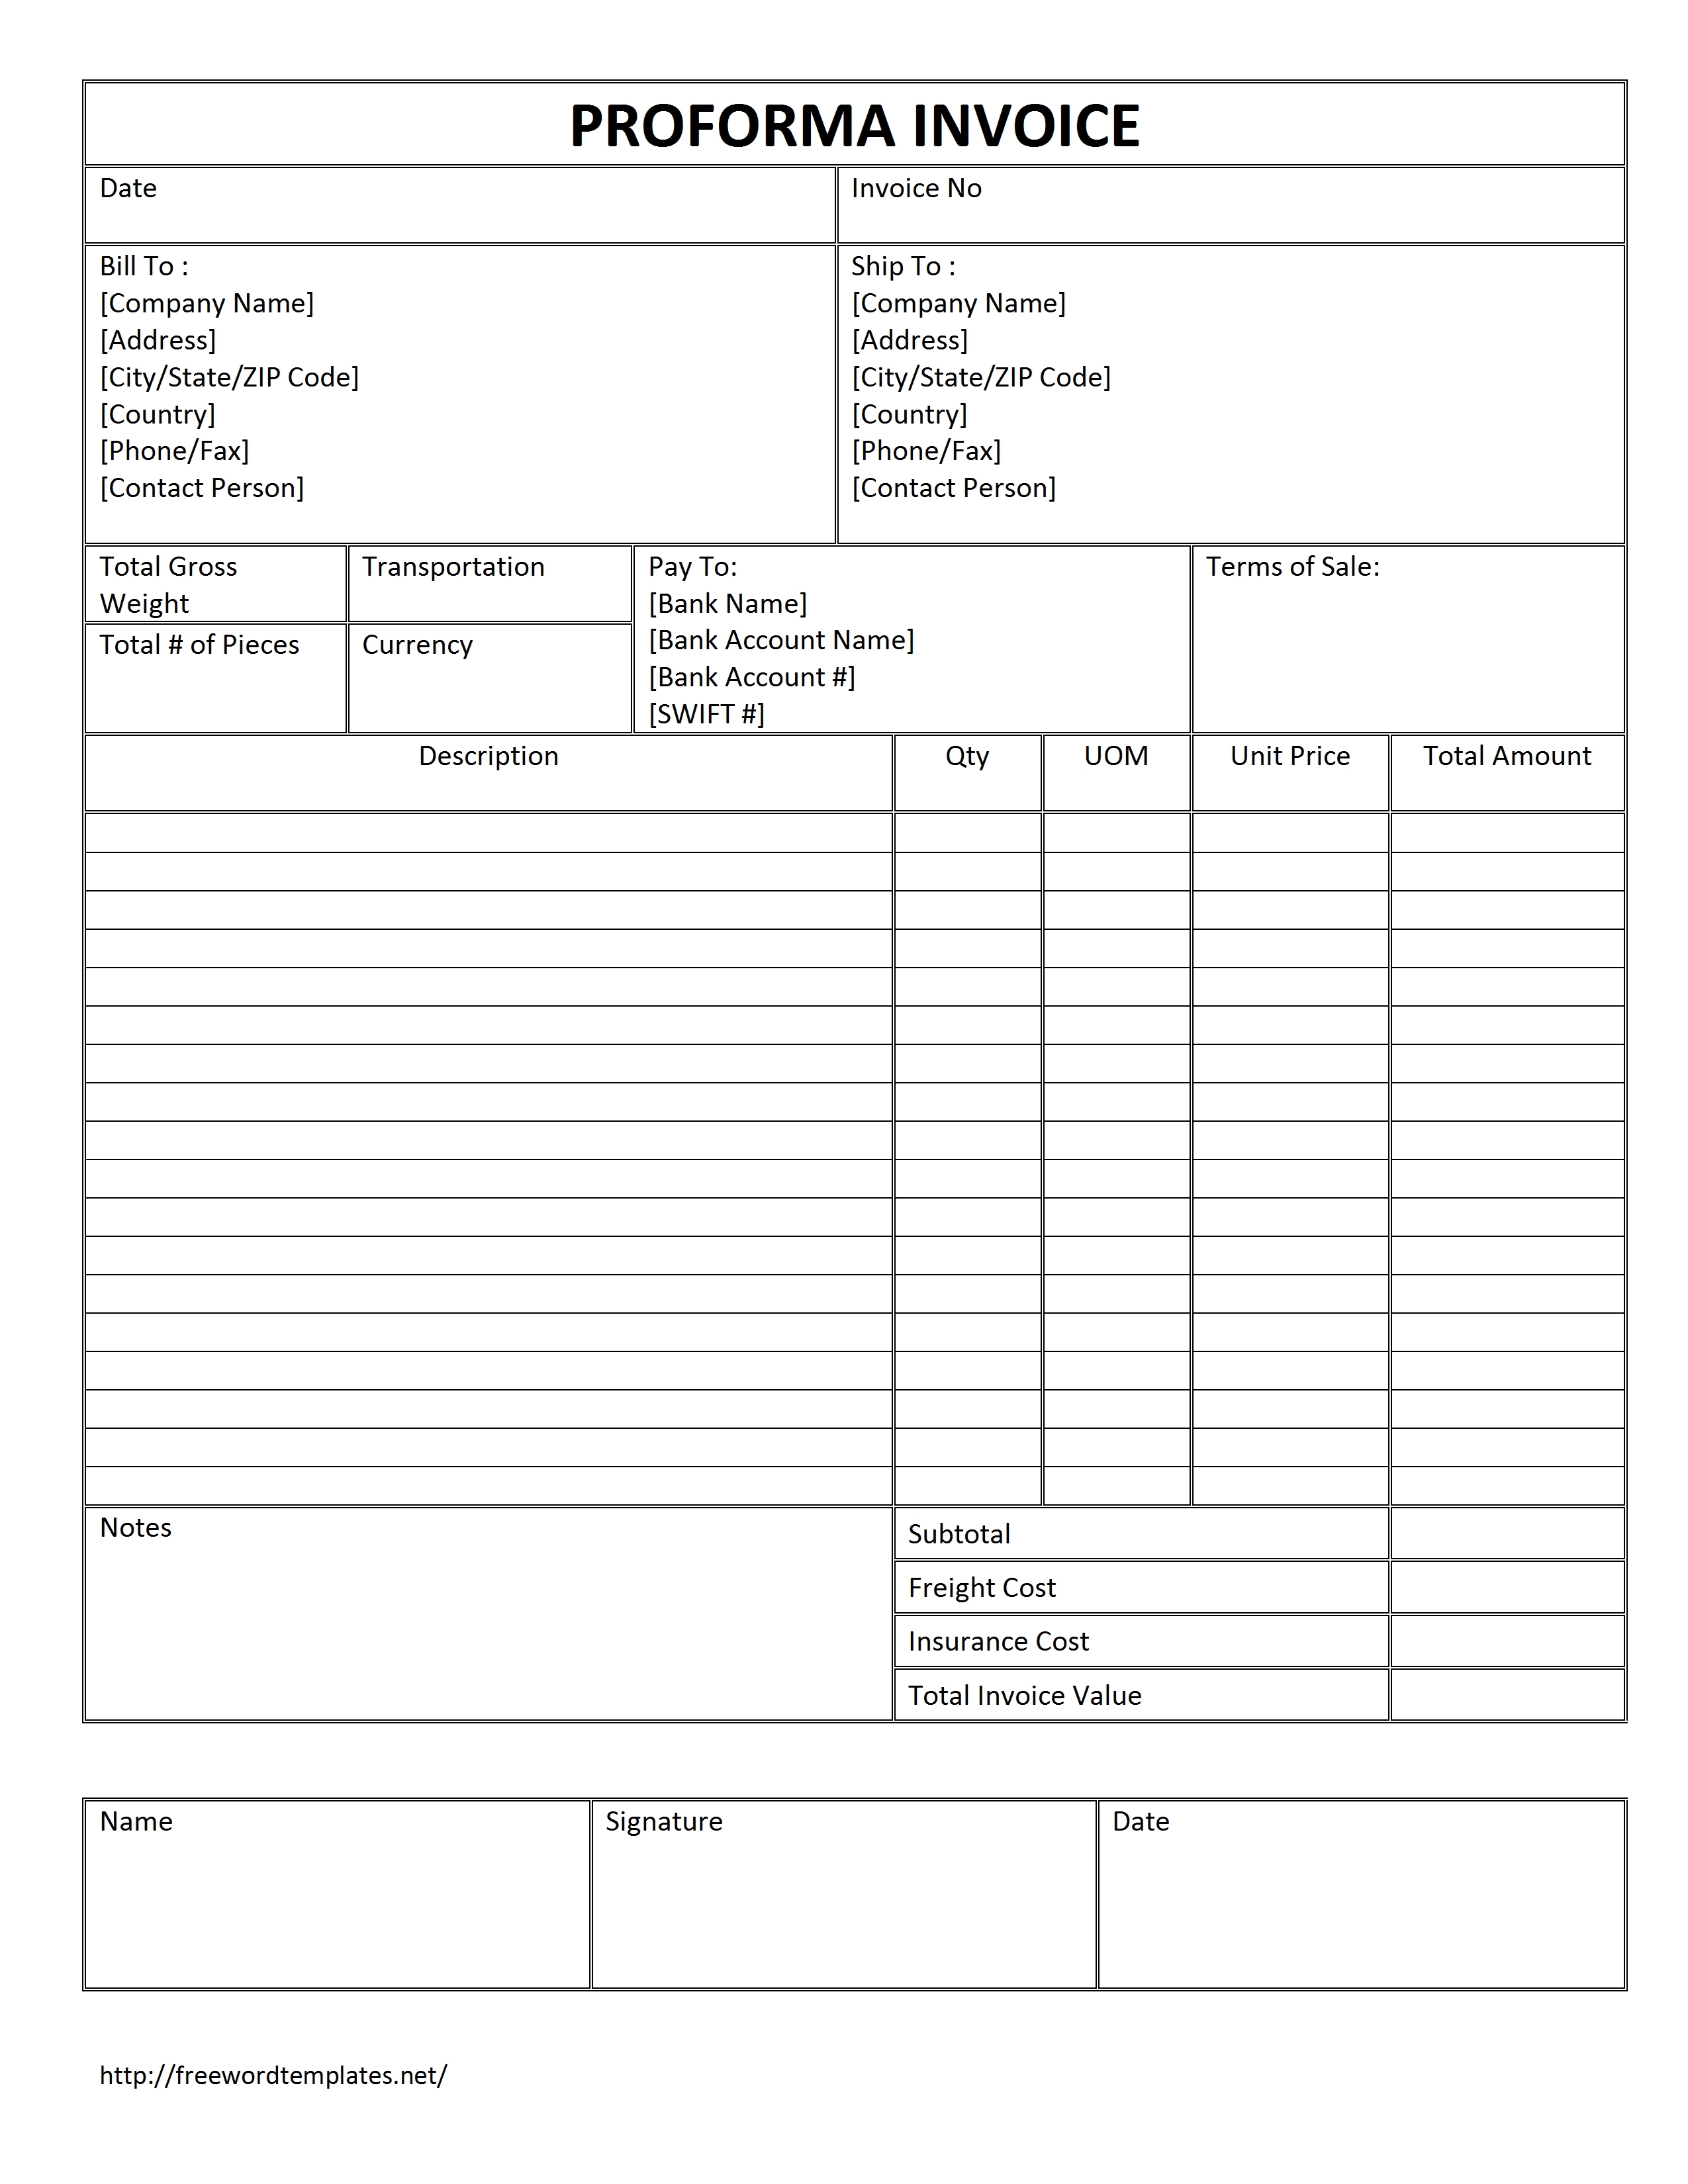 Proforma Invoice Format For Advance Payment Invoice Template Ideas